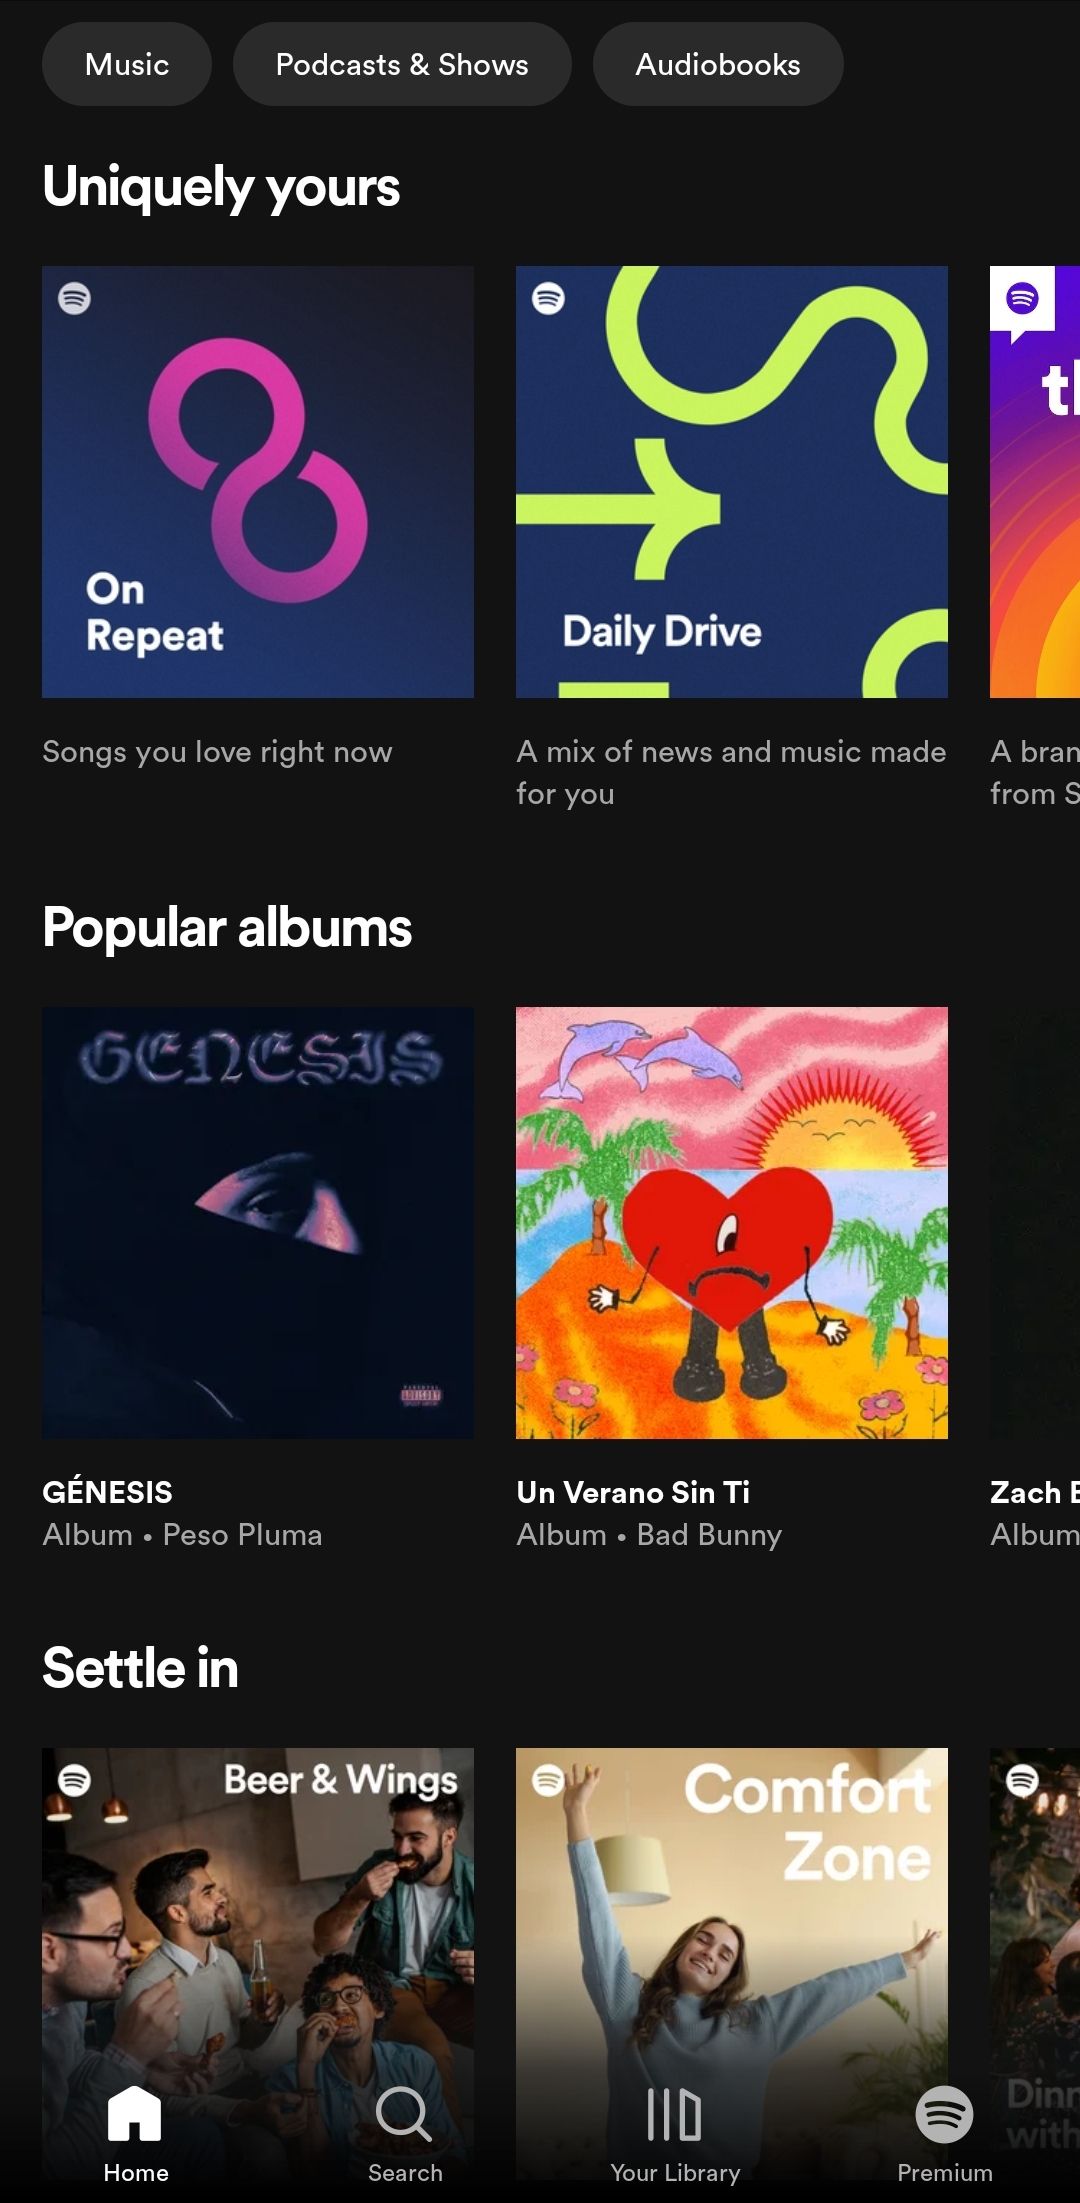 Spotify Premium gets a great free audiobooks upgrade – here's